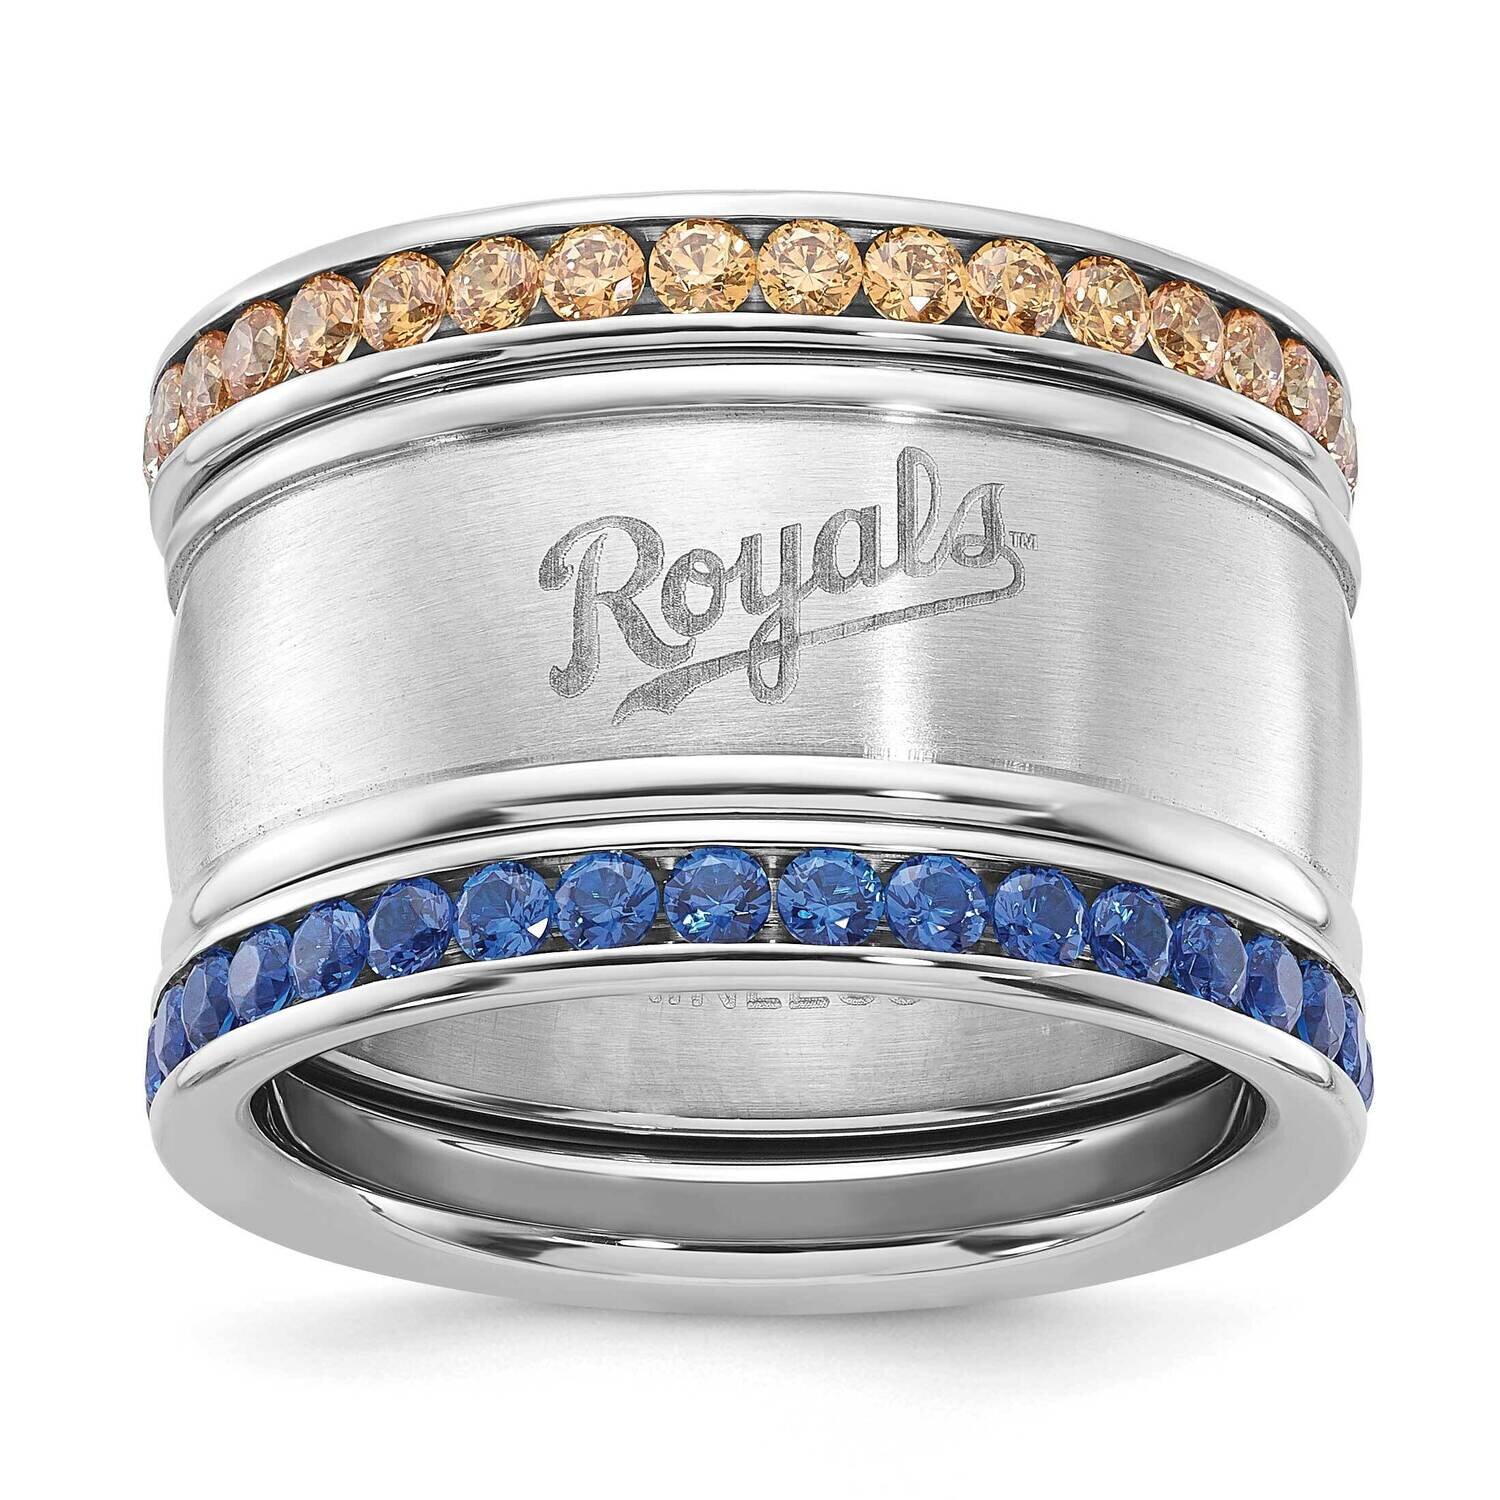 MLB Kansas City Royals Crystal Triple Stacked Ring Set Stainless Steel ROY035CR-SZ6